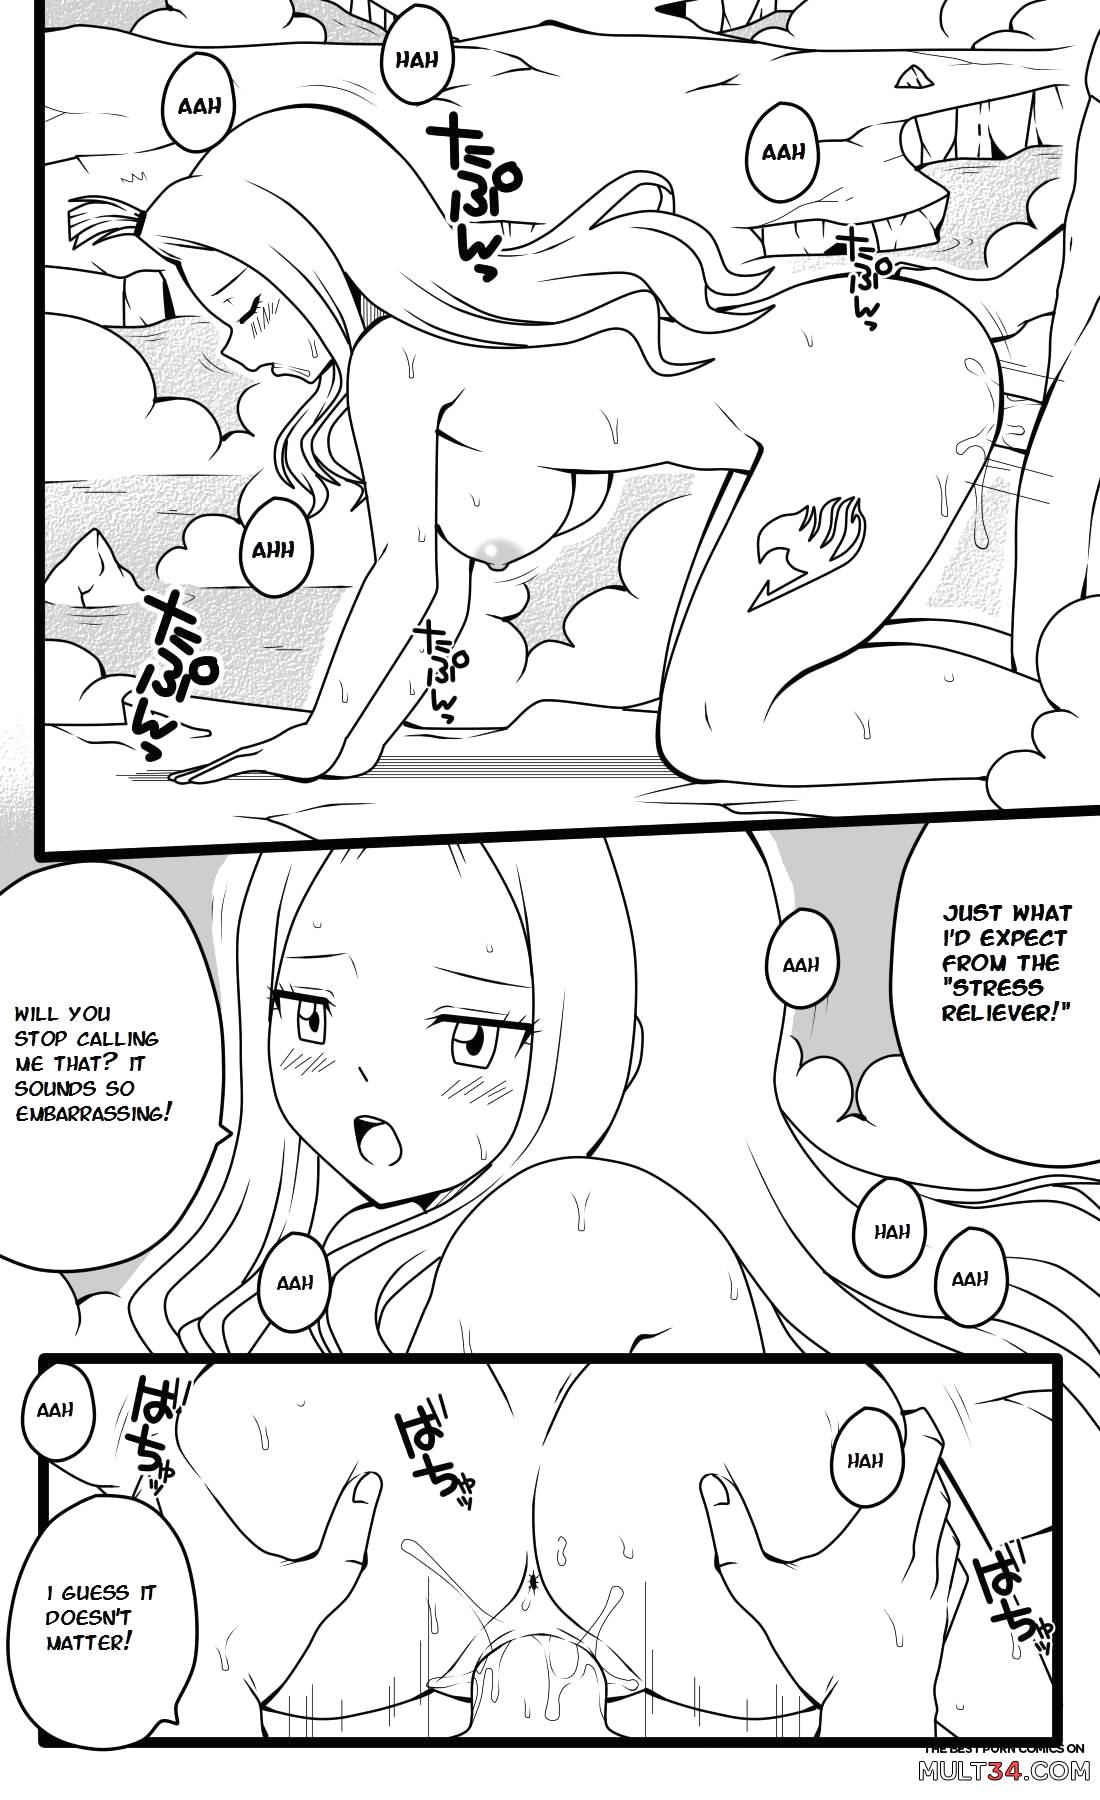 Mirajane's Stress Relief 2 page 7